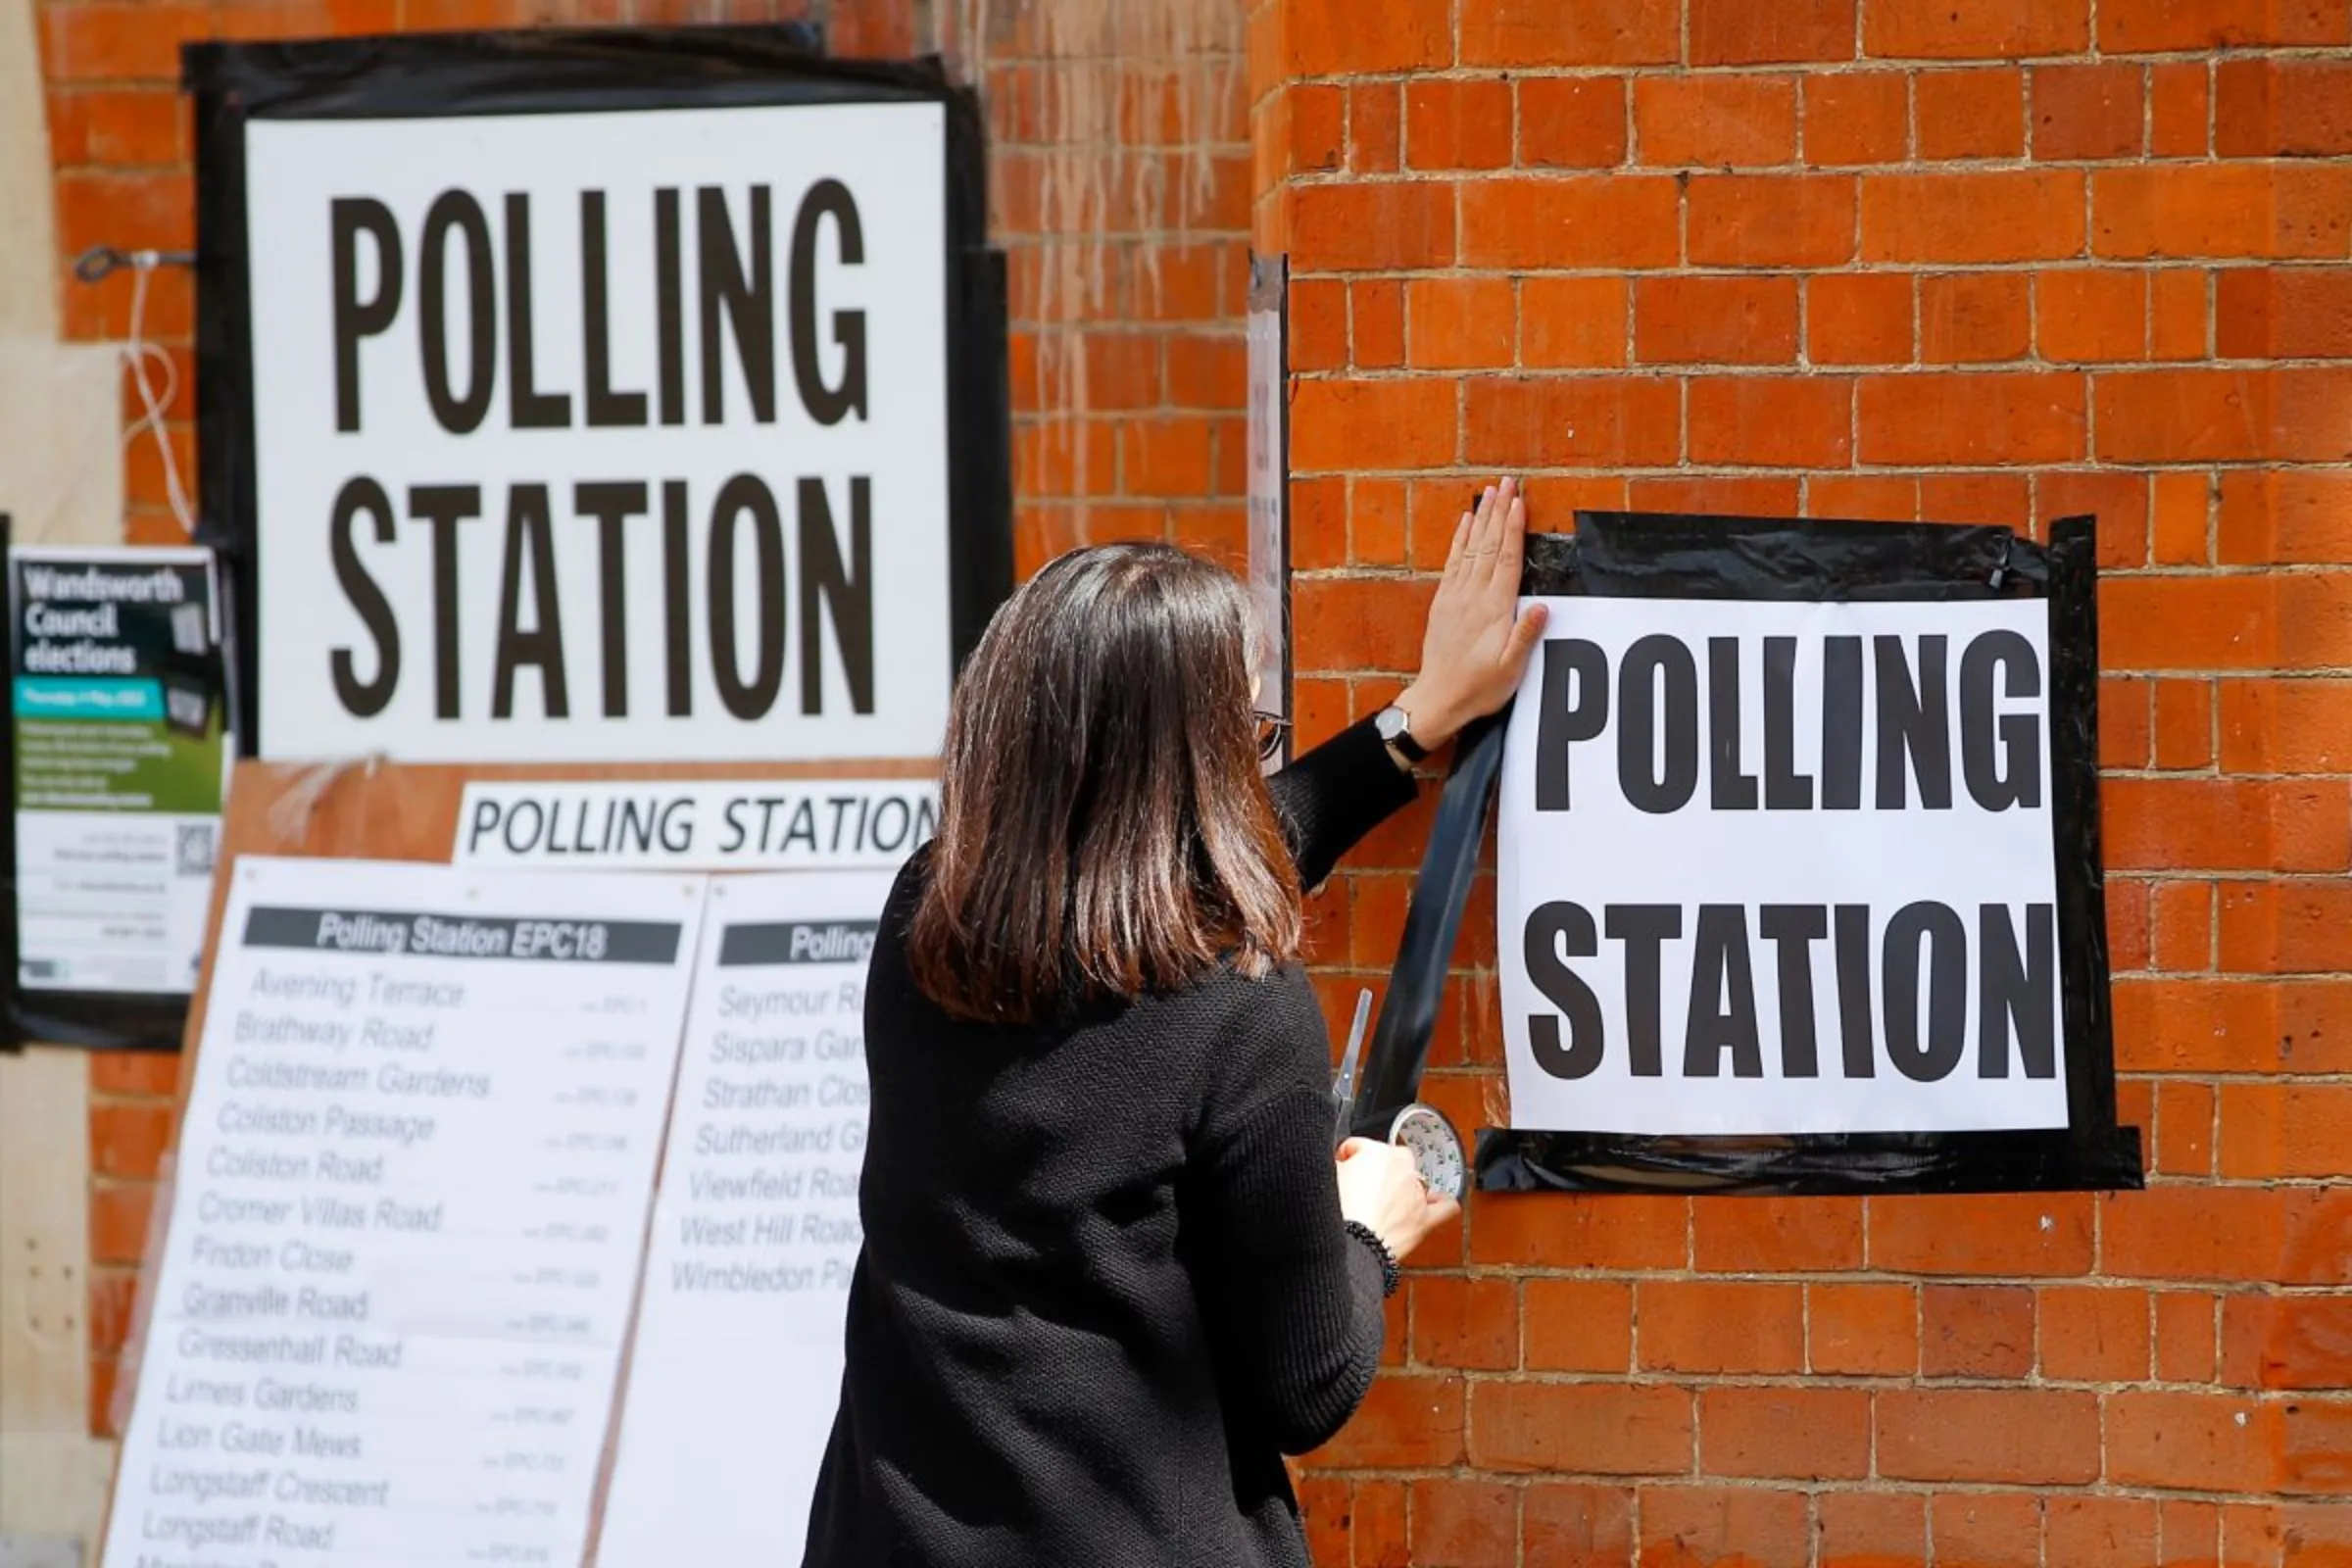 A woman attaches a sign on the wall of a polling station, during the local elections in London, Britain May 5, 2022